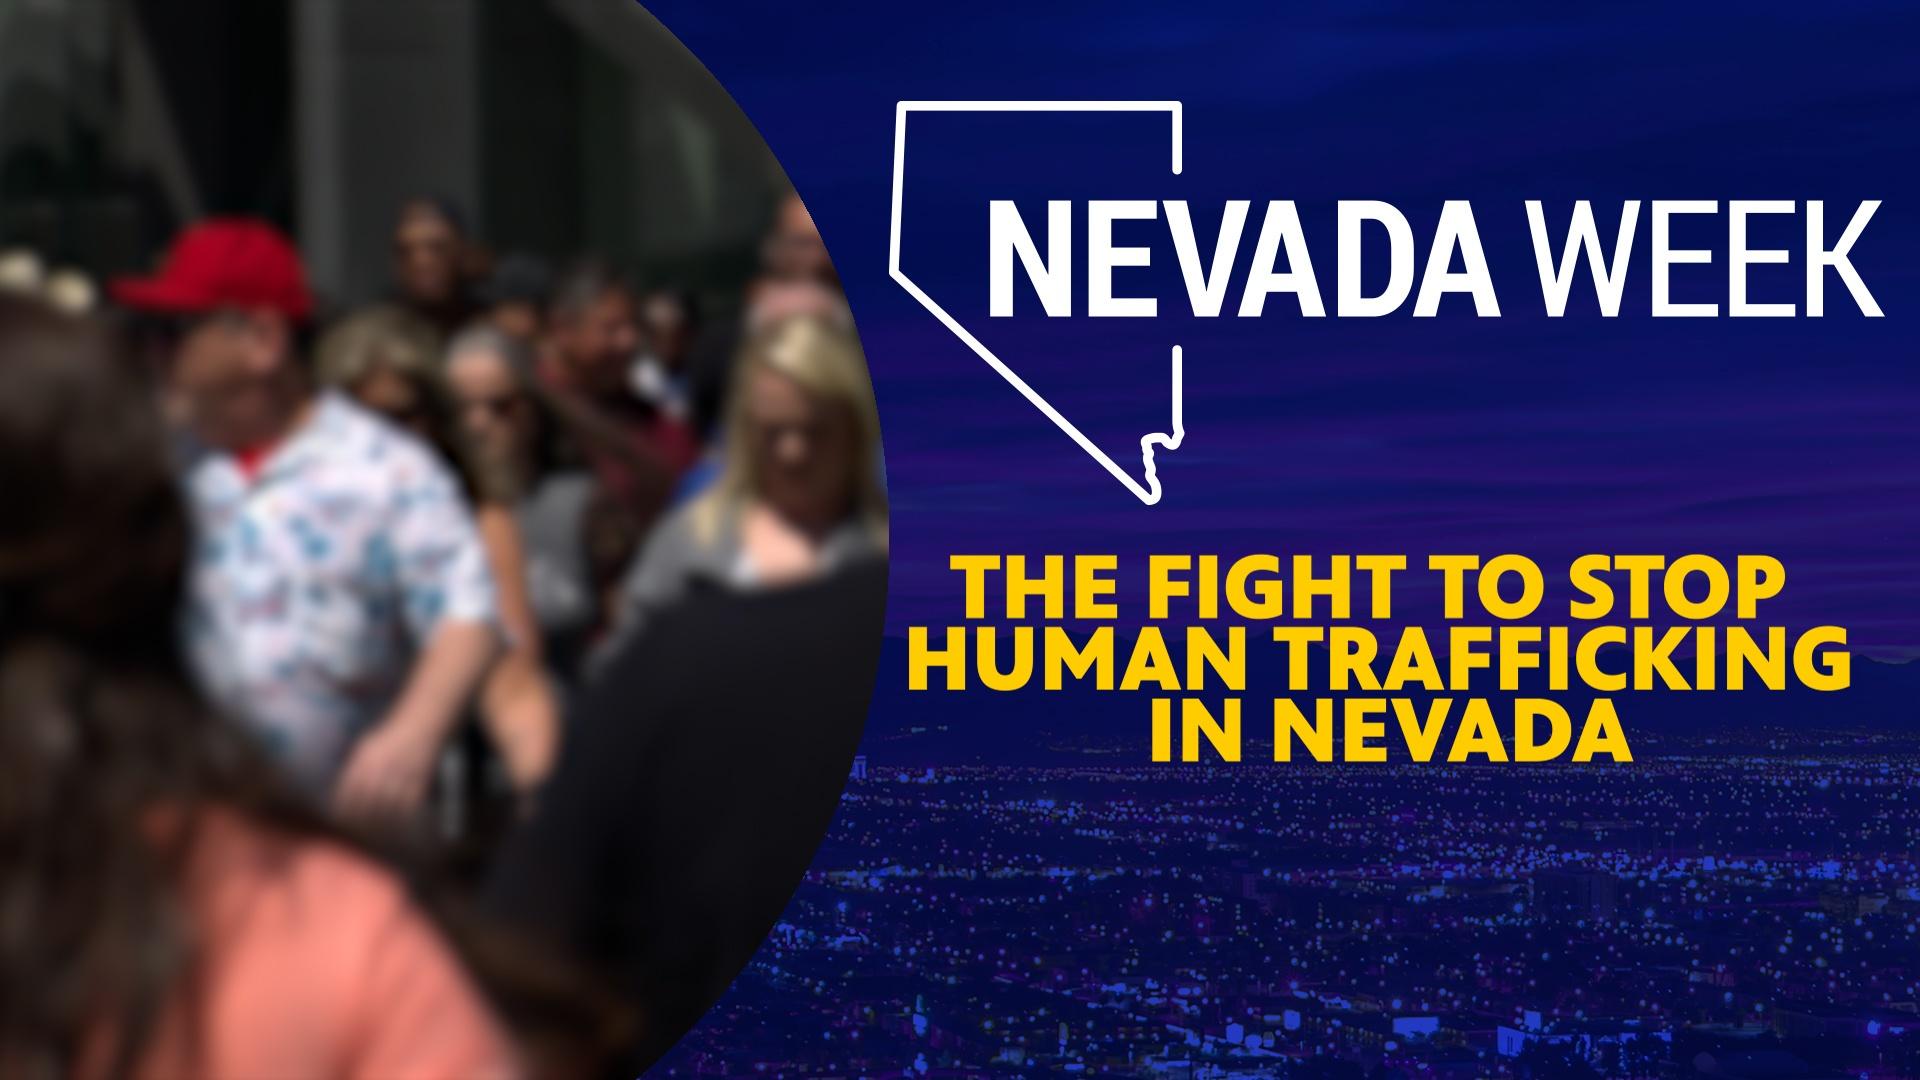 The Fight to Stop Human Trafficking in Nevada